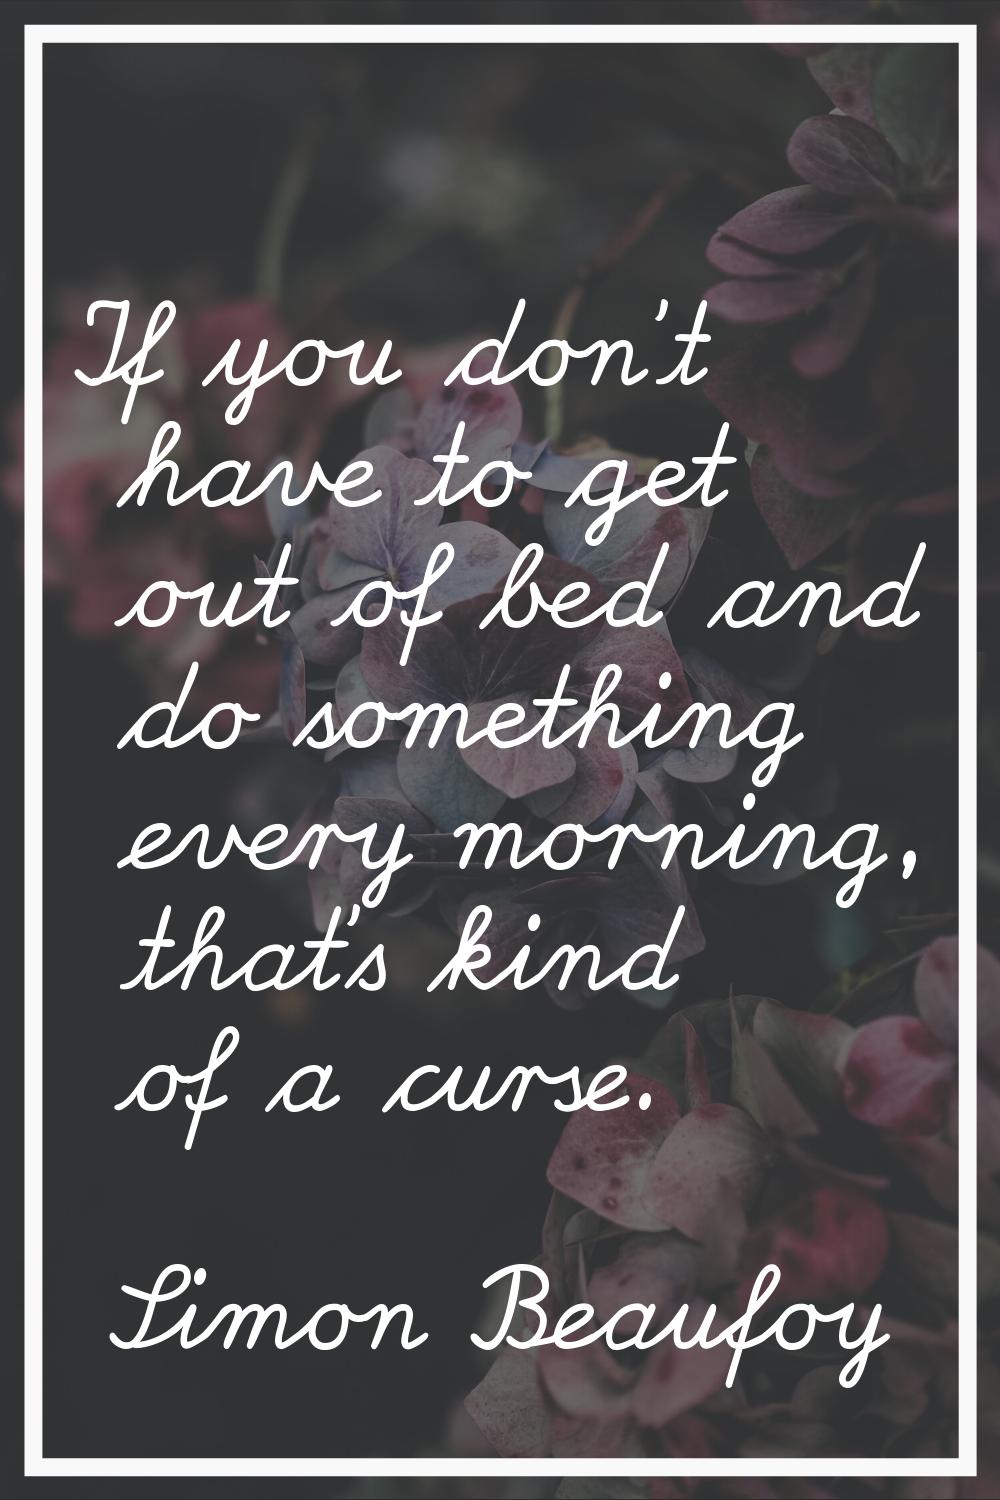 If you don't have to get out of bed and do something every morning, that's kind of a curse.